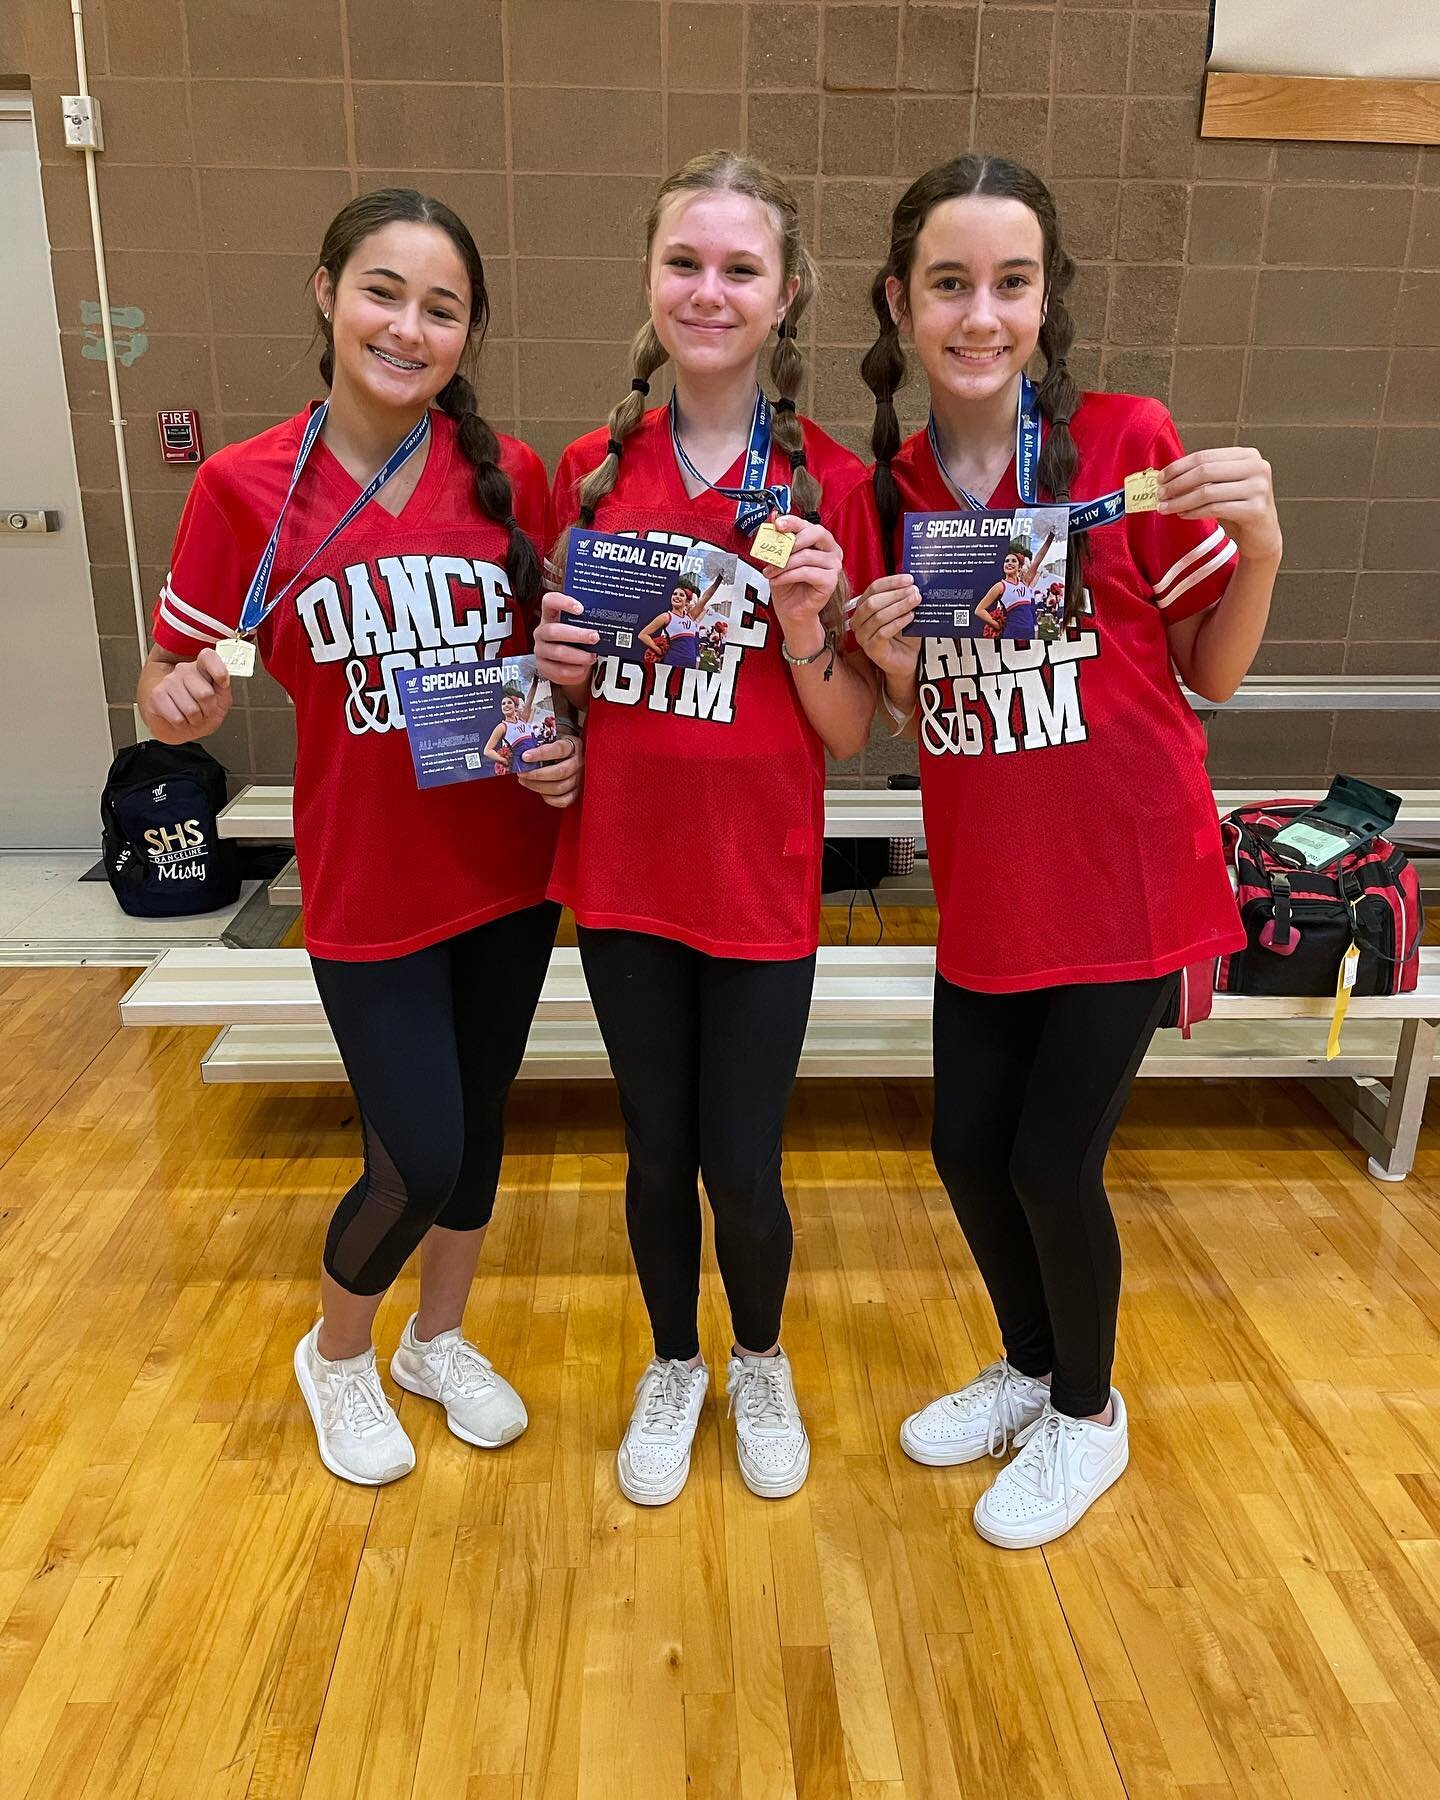 ❤️ Four Dance &amp; Gym students attended UDA dance camp last week. ✨ These girls did an amazing job! ✨ They won the spirit stick every night and drill down ribbons! ❤️

⭐️ Three of the girls competed for All American Dancer and won! ⭐️ These girls w